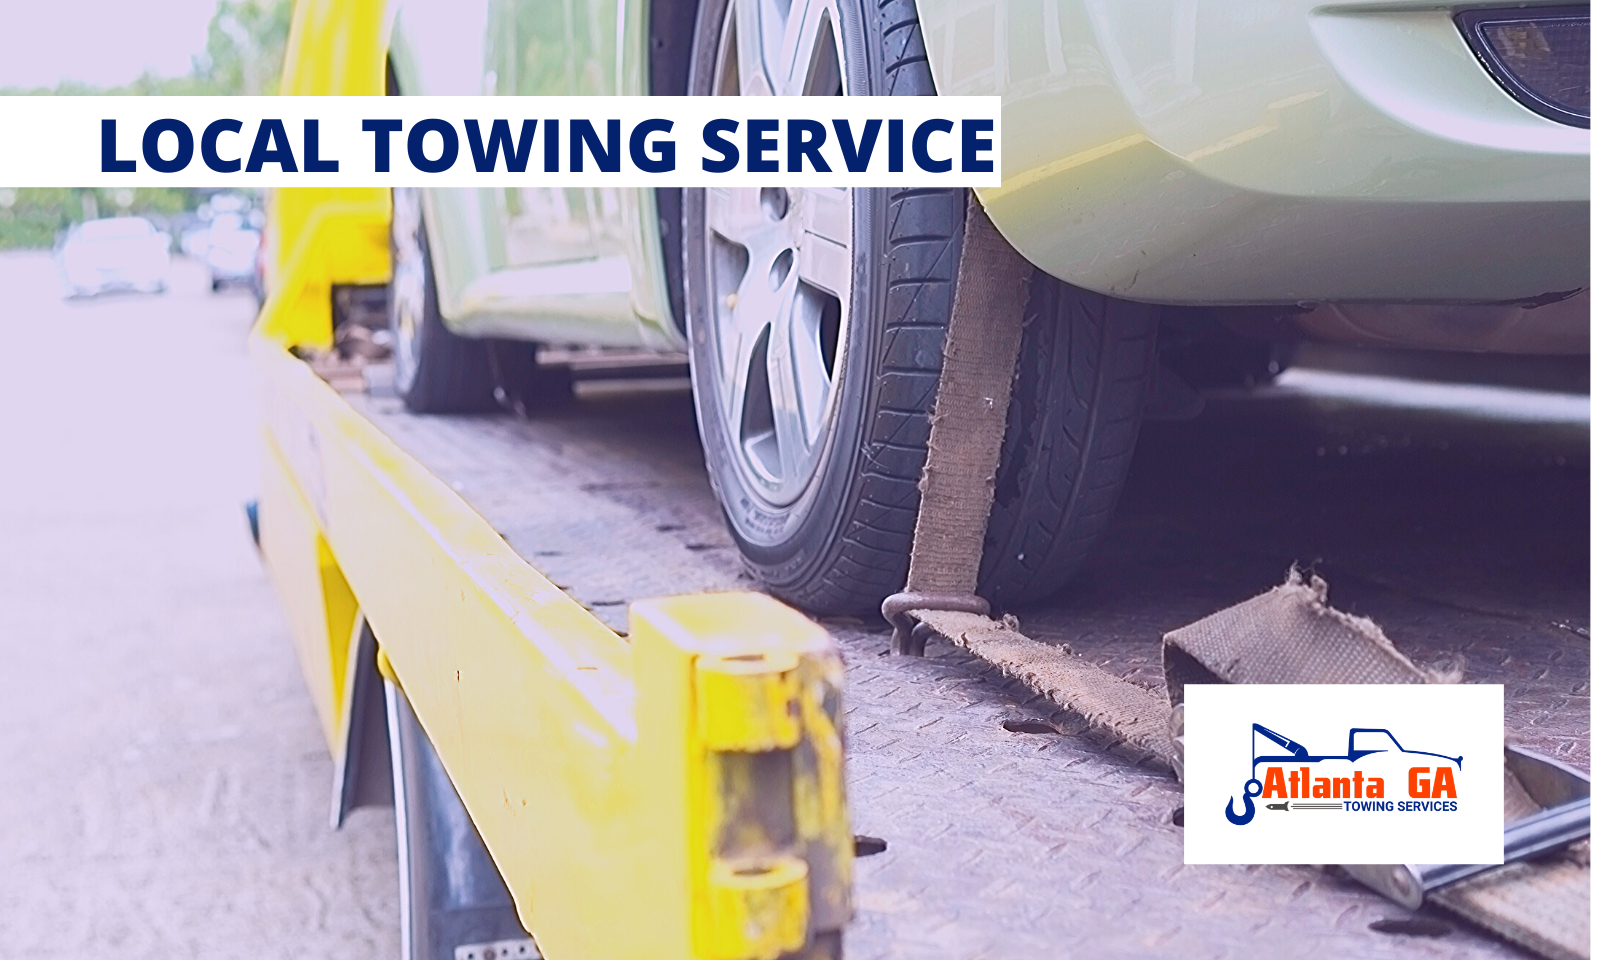 LOCAL TOWING SERVICE